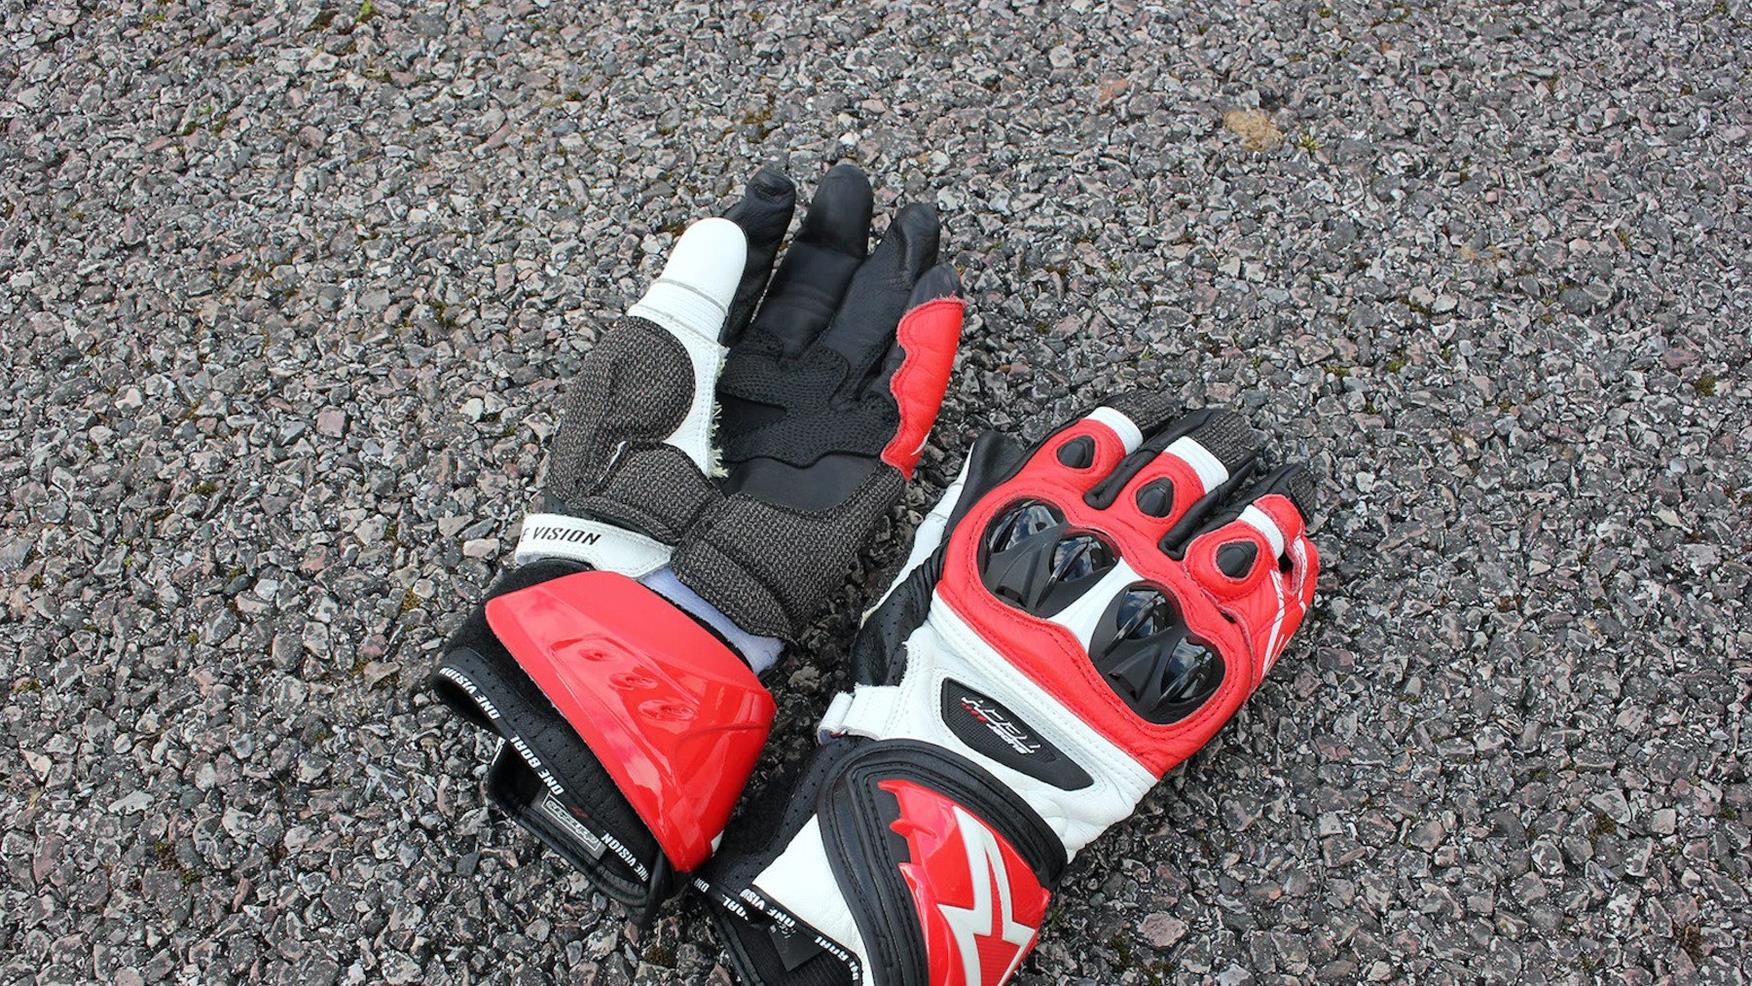 Tried and tested: Alpinestars Supertech gloves review